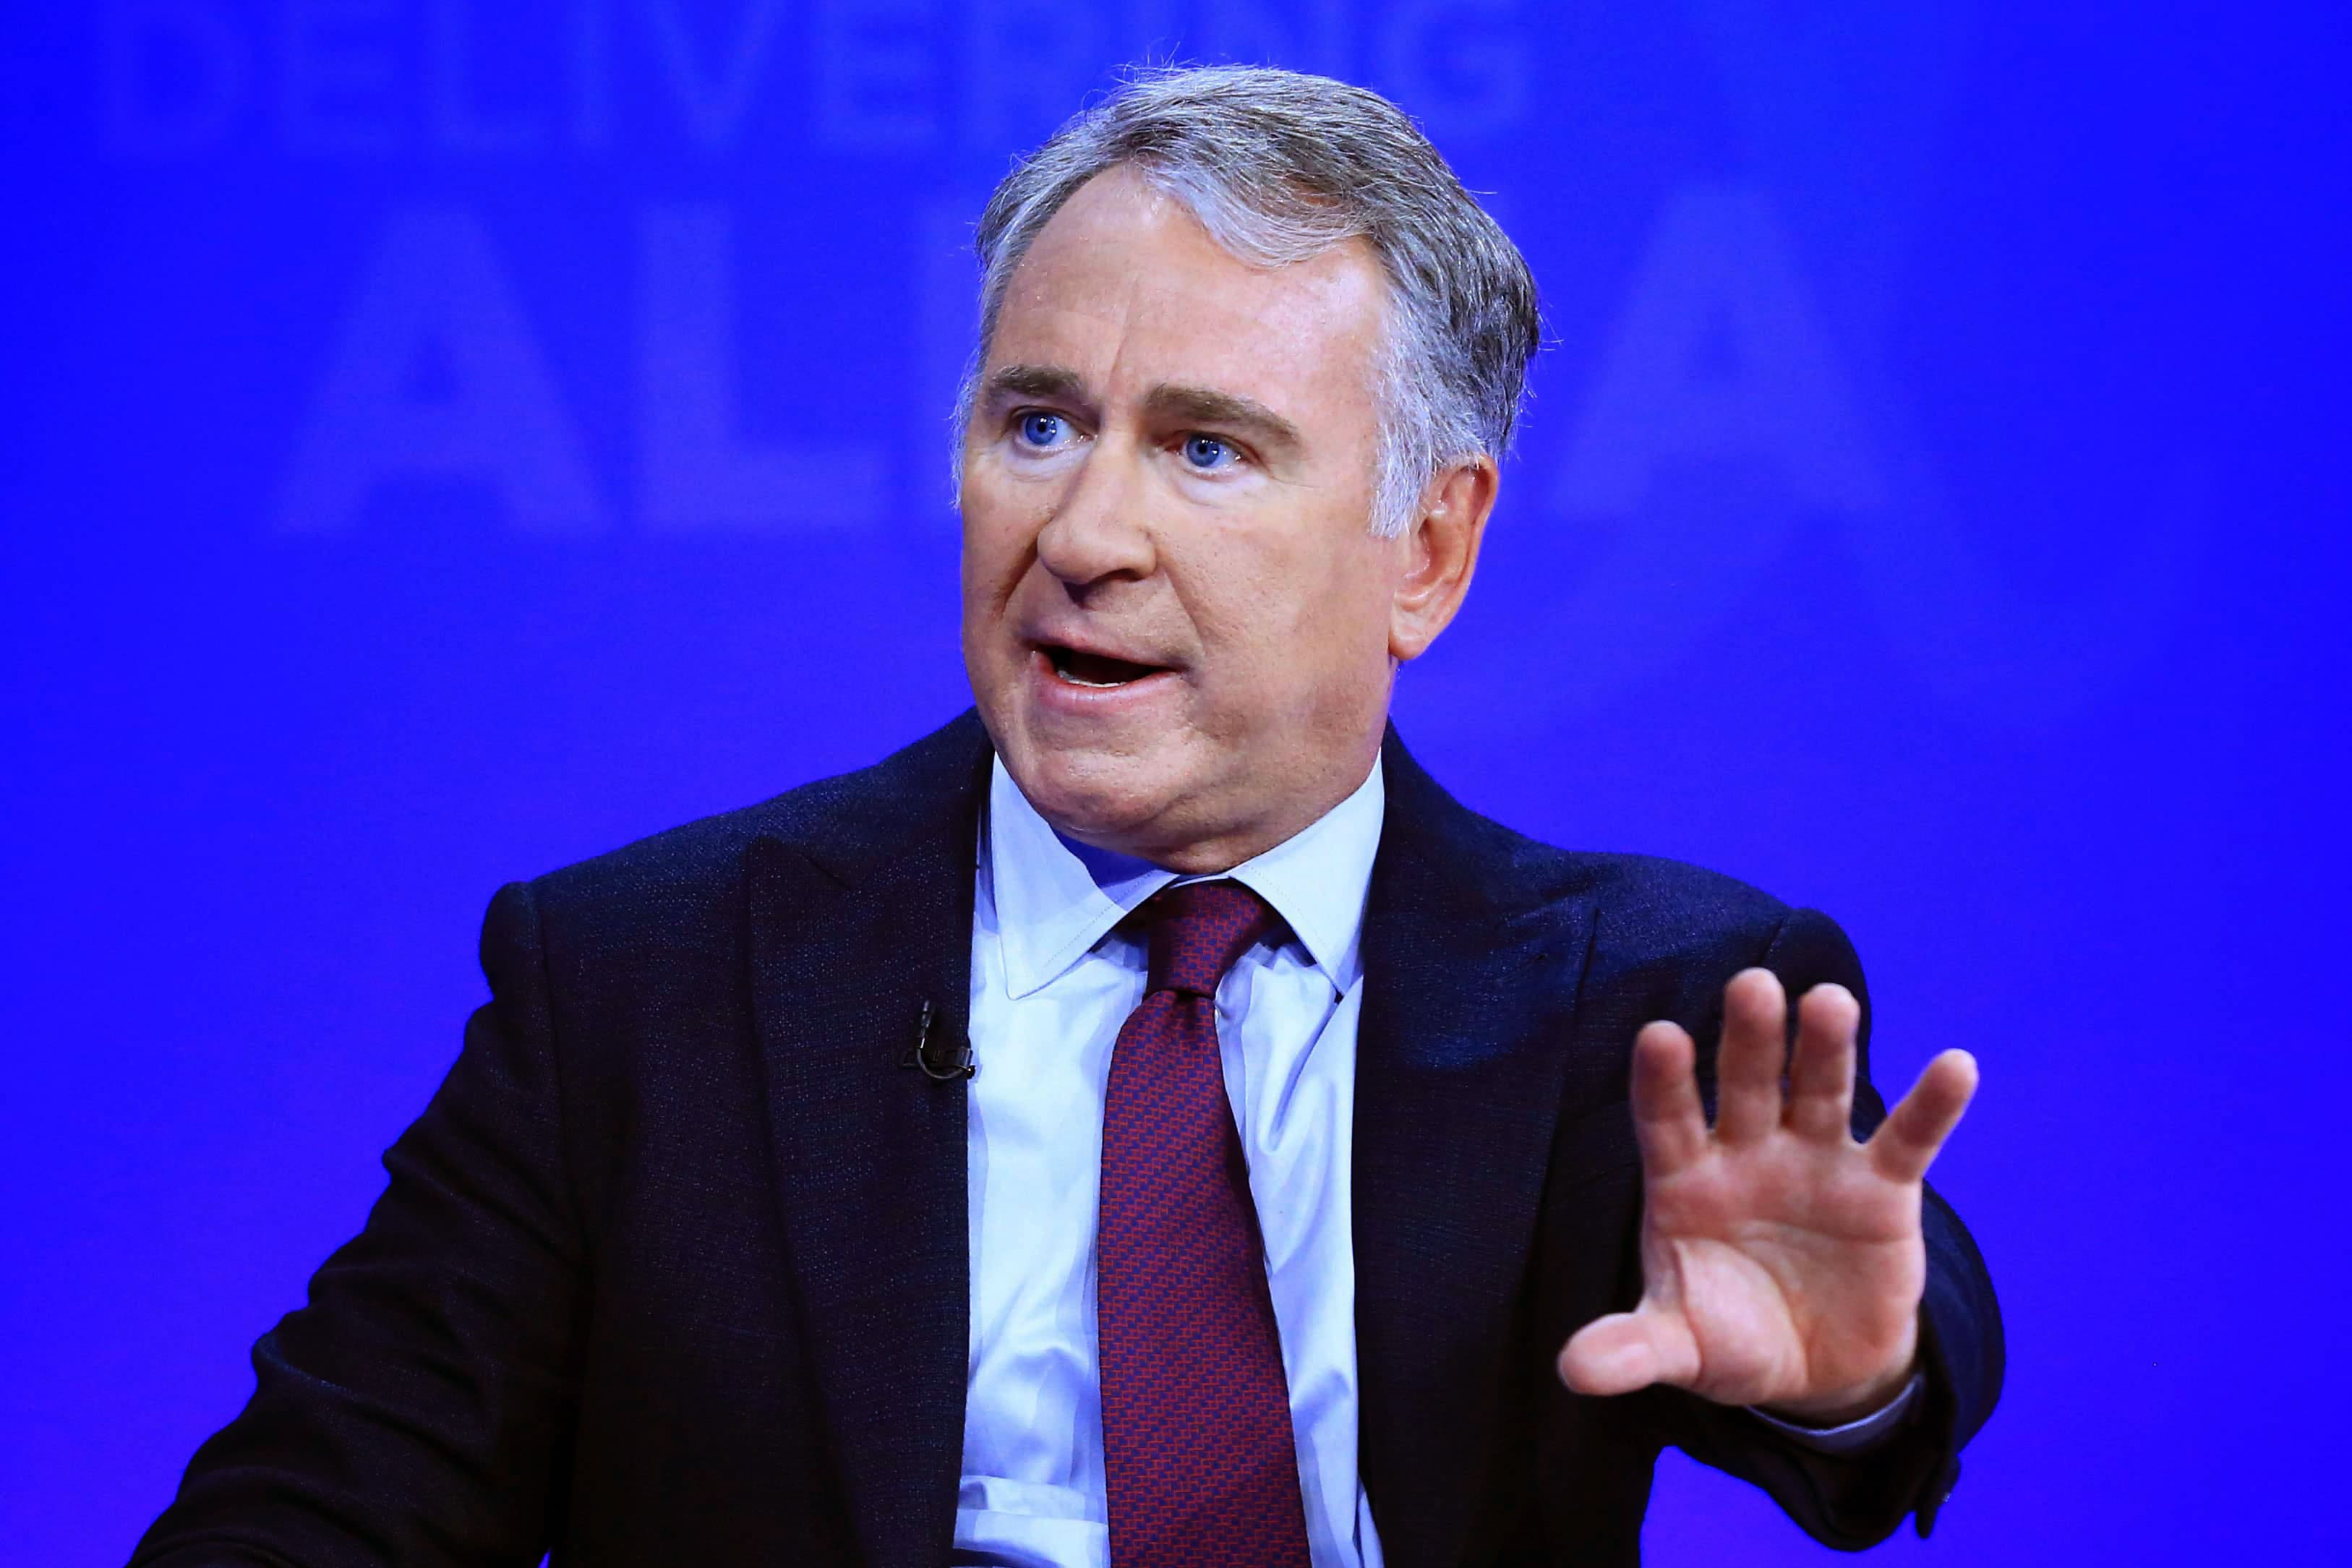 Ken Griffin’s hedge fund Citadel is up 29% this year. Here's how they’re doing it